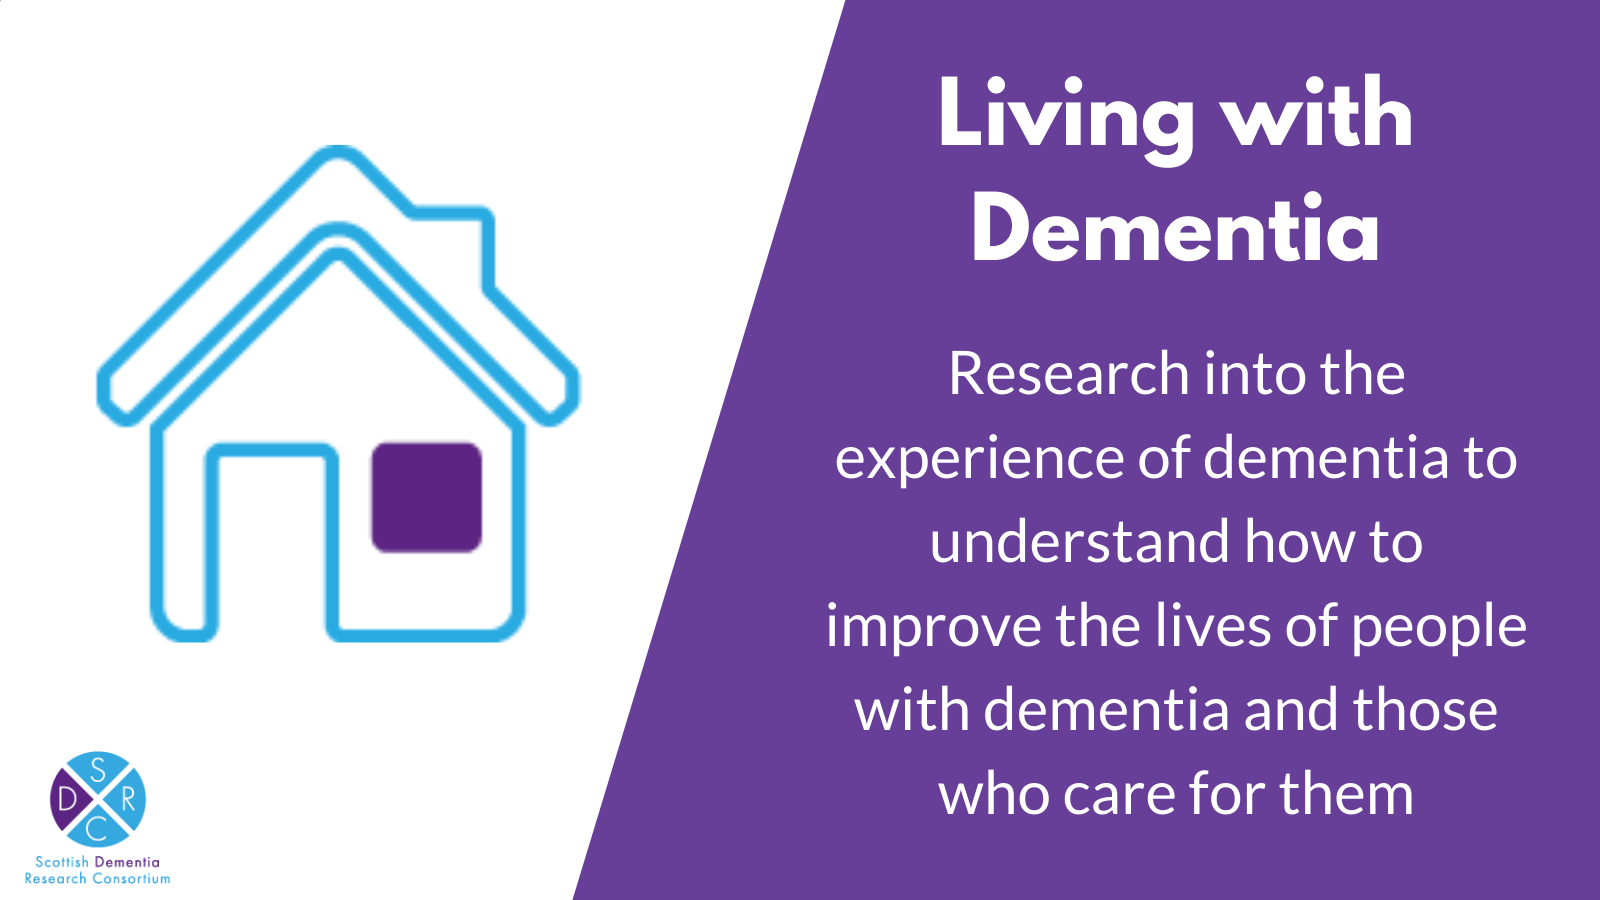 SDRC Annual Report 2021/22: Living with Dementia